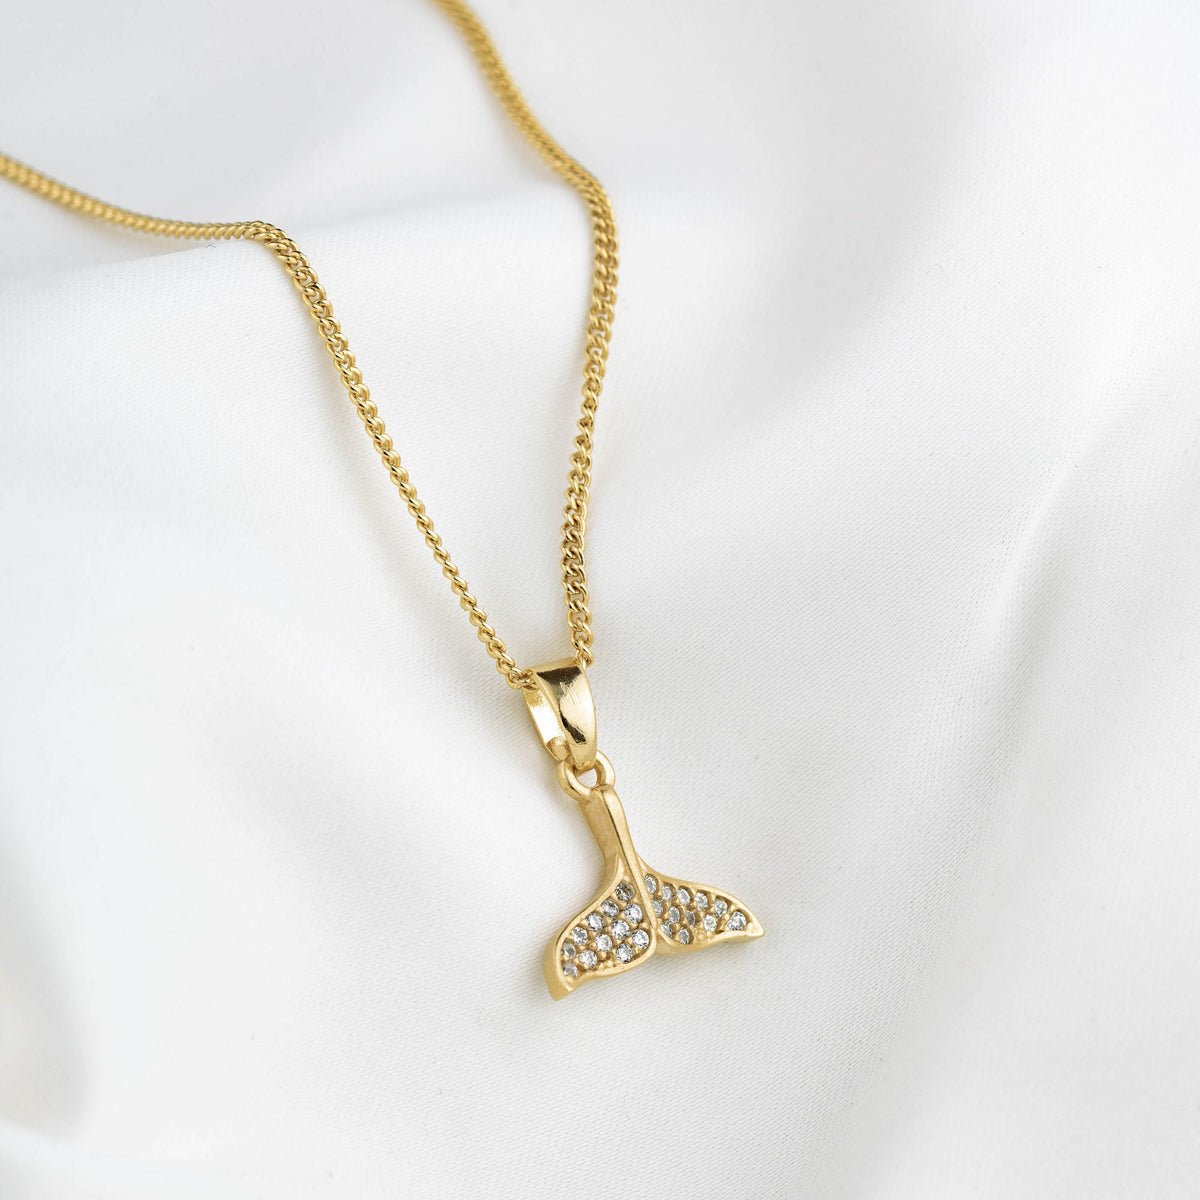 Sparkling Whale Tail Necklace